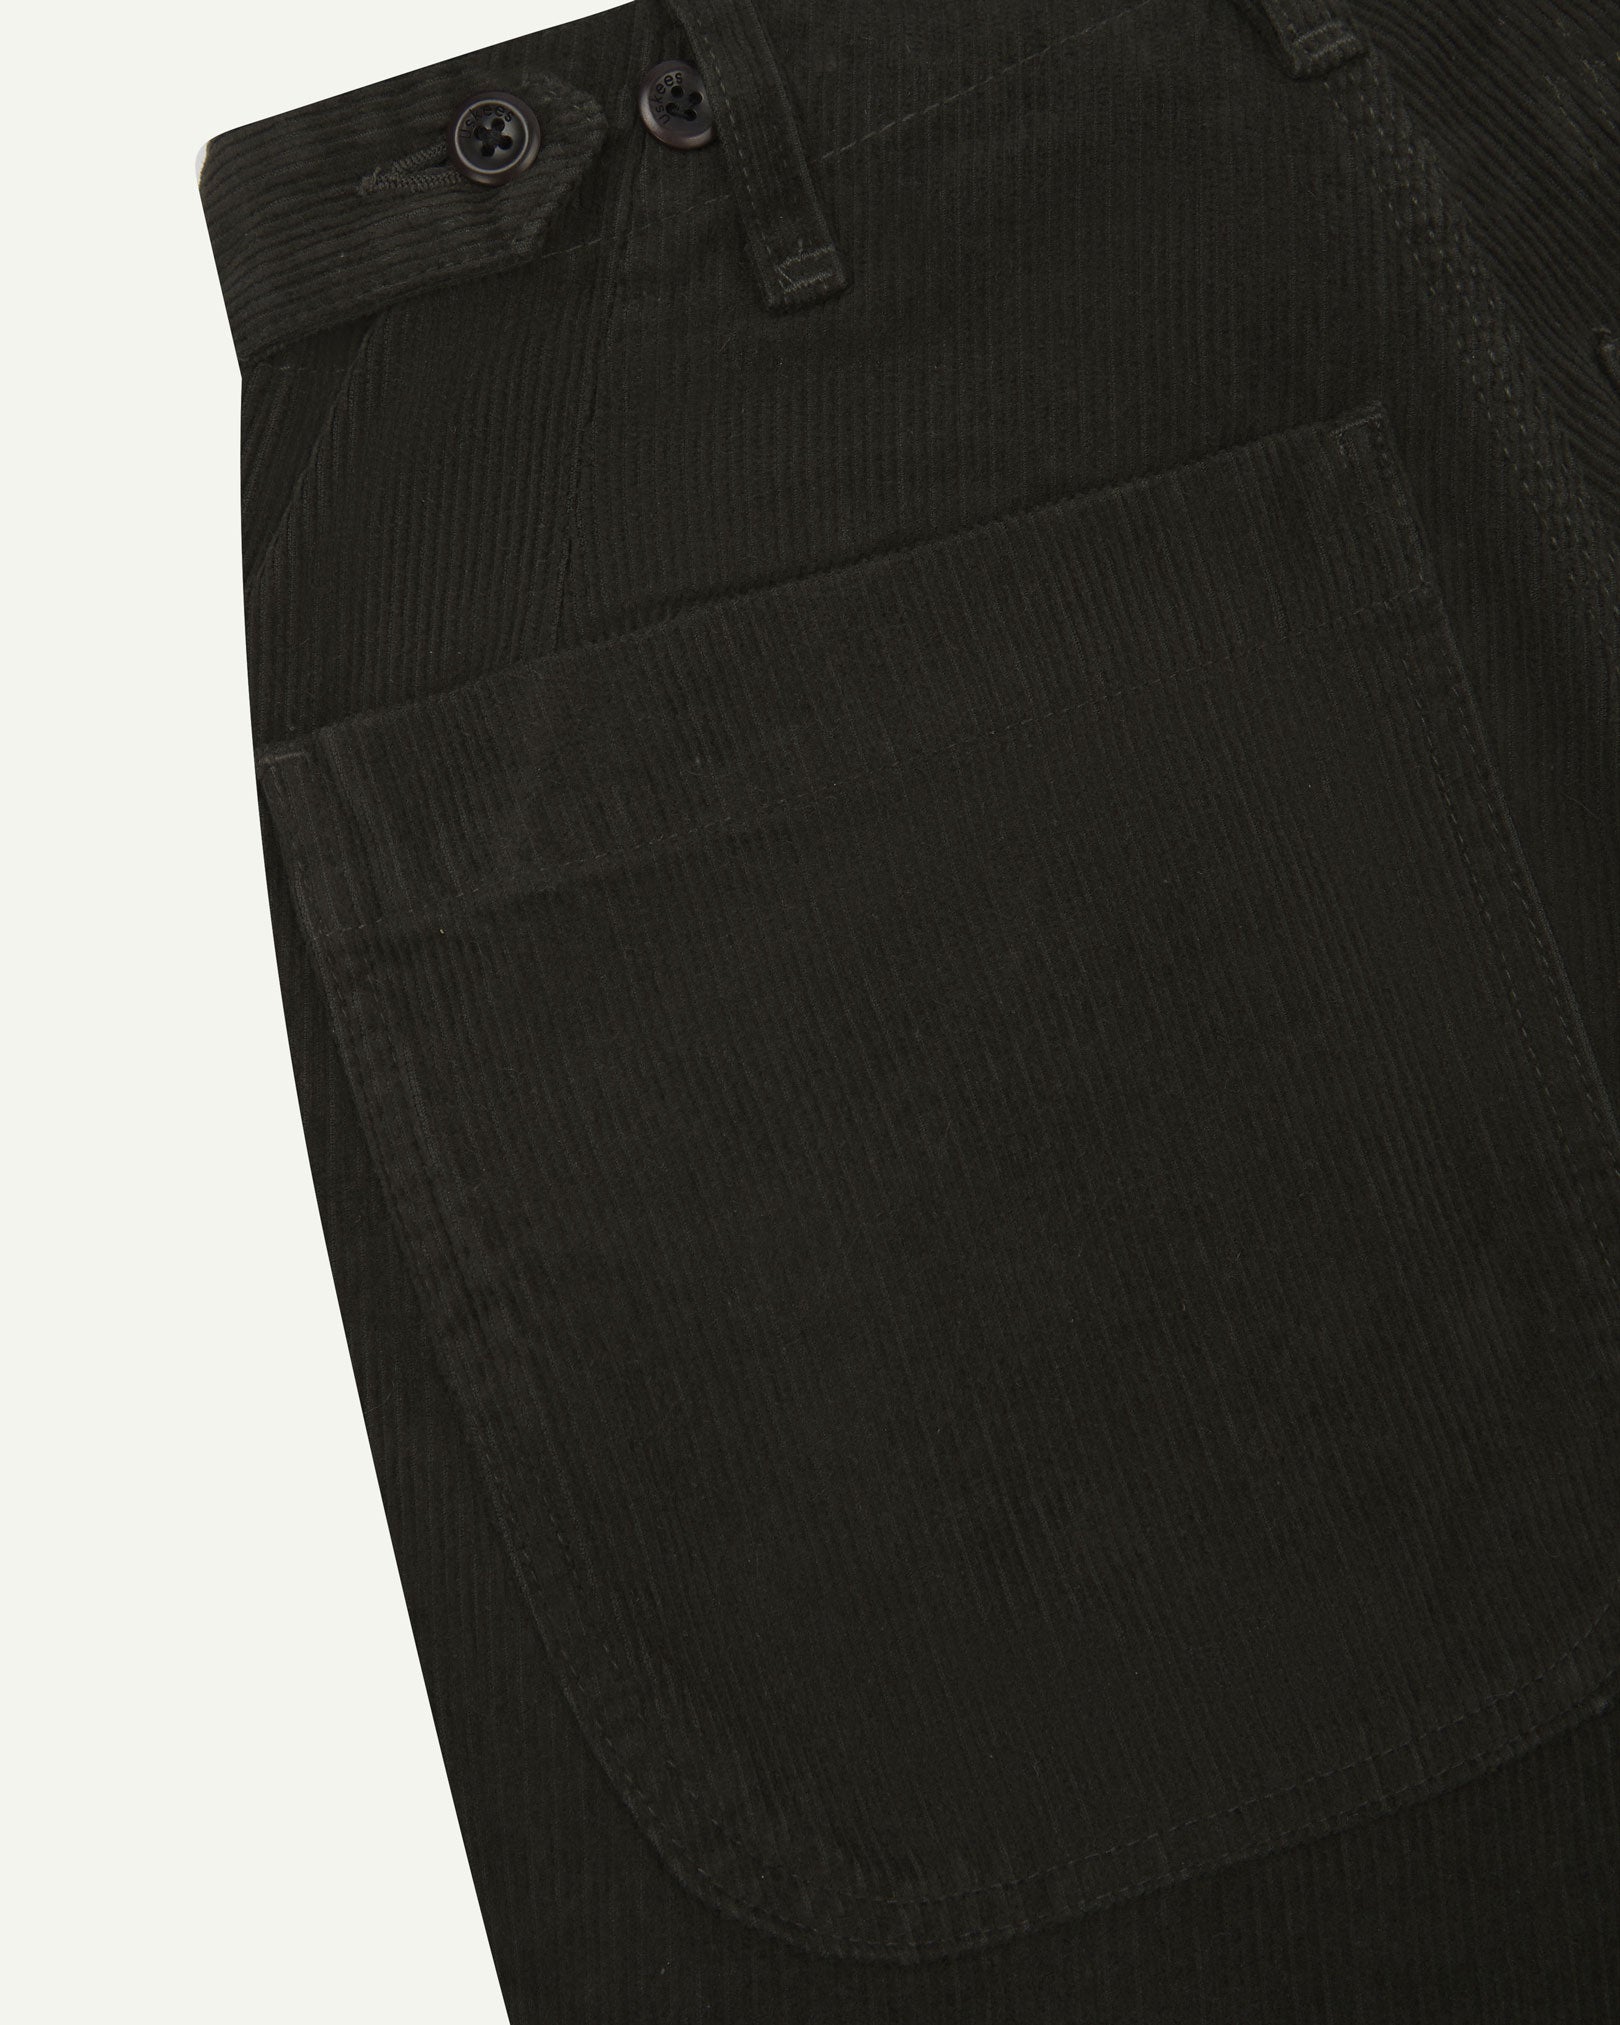 Close up back view of Uskees 5012 corduroy trousers showing back pockets, adjustable waistband and corozo buttons.